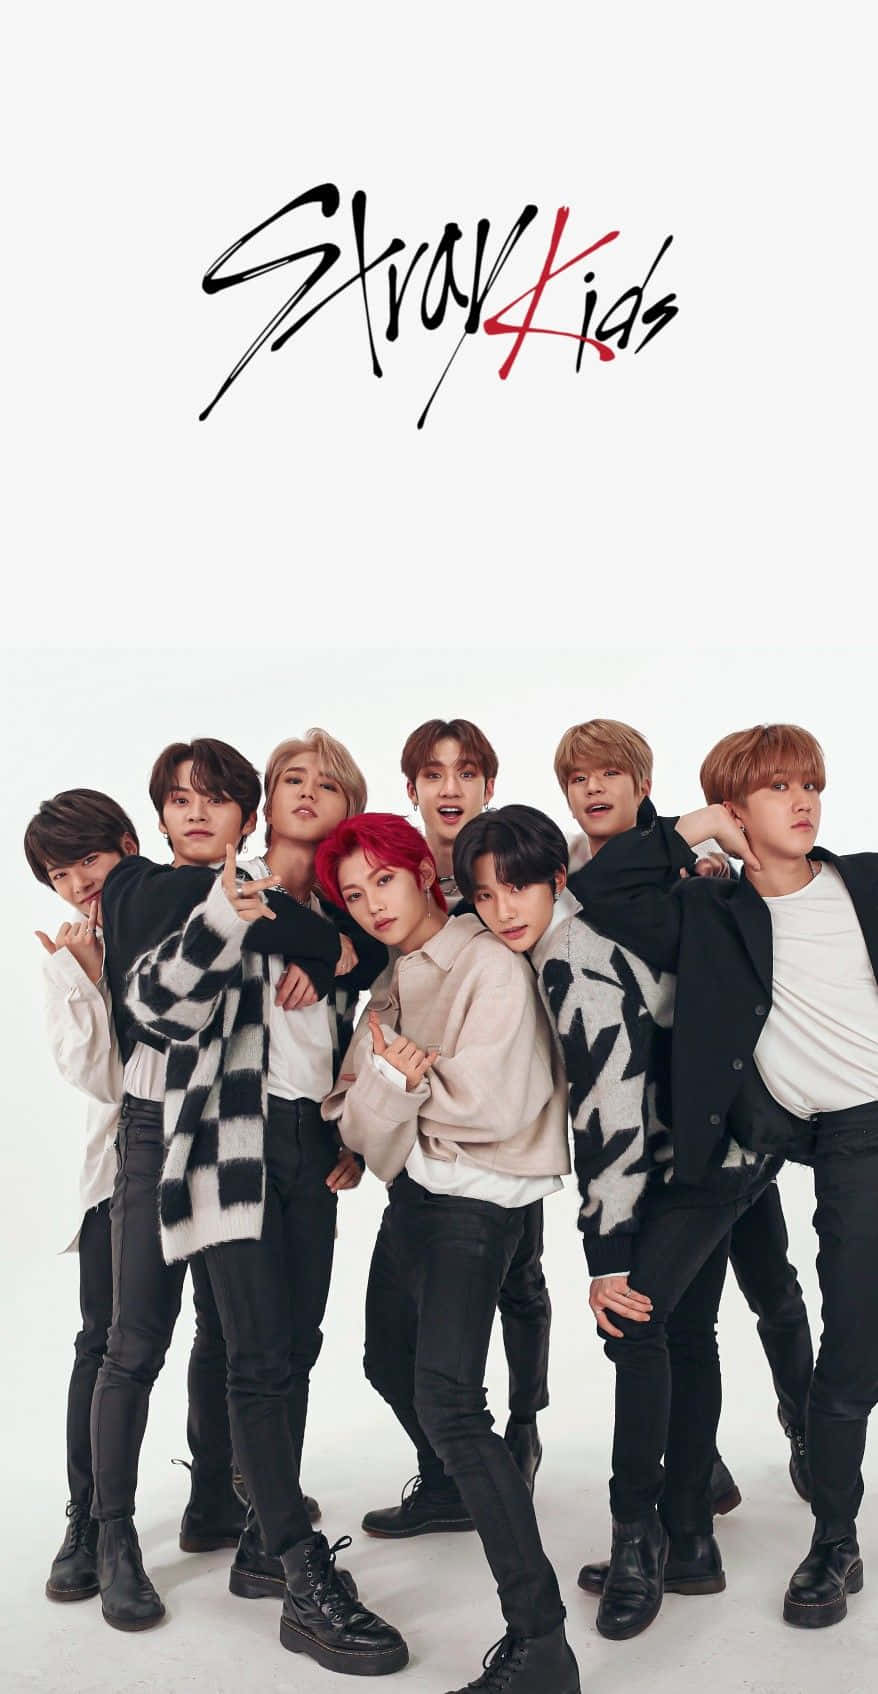 Bts Stay Kids - A Poster With The Words Stay Kids Wallpaper